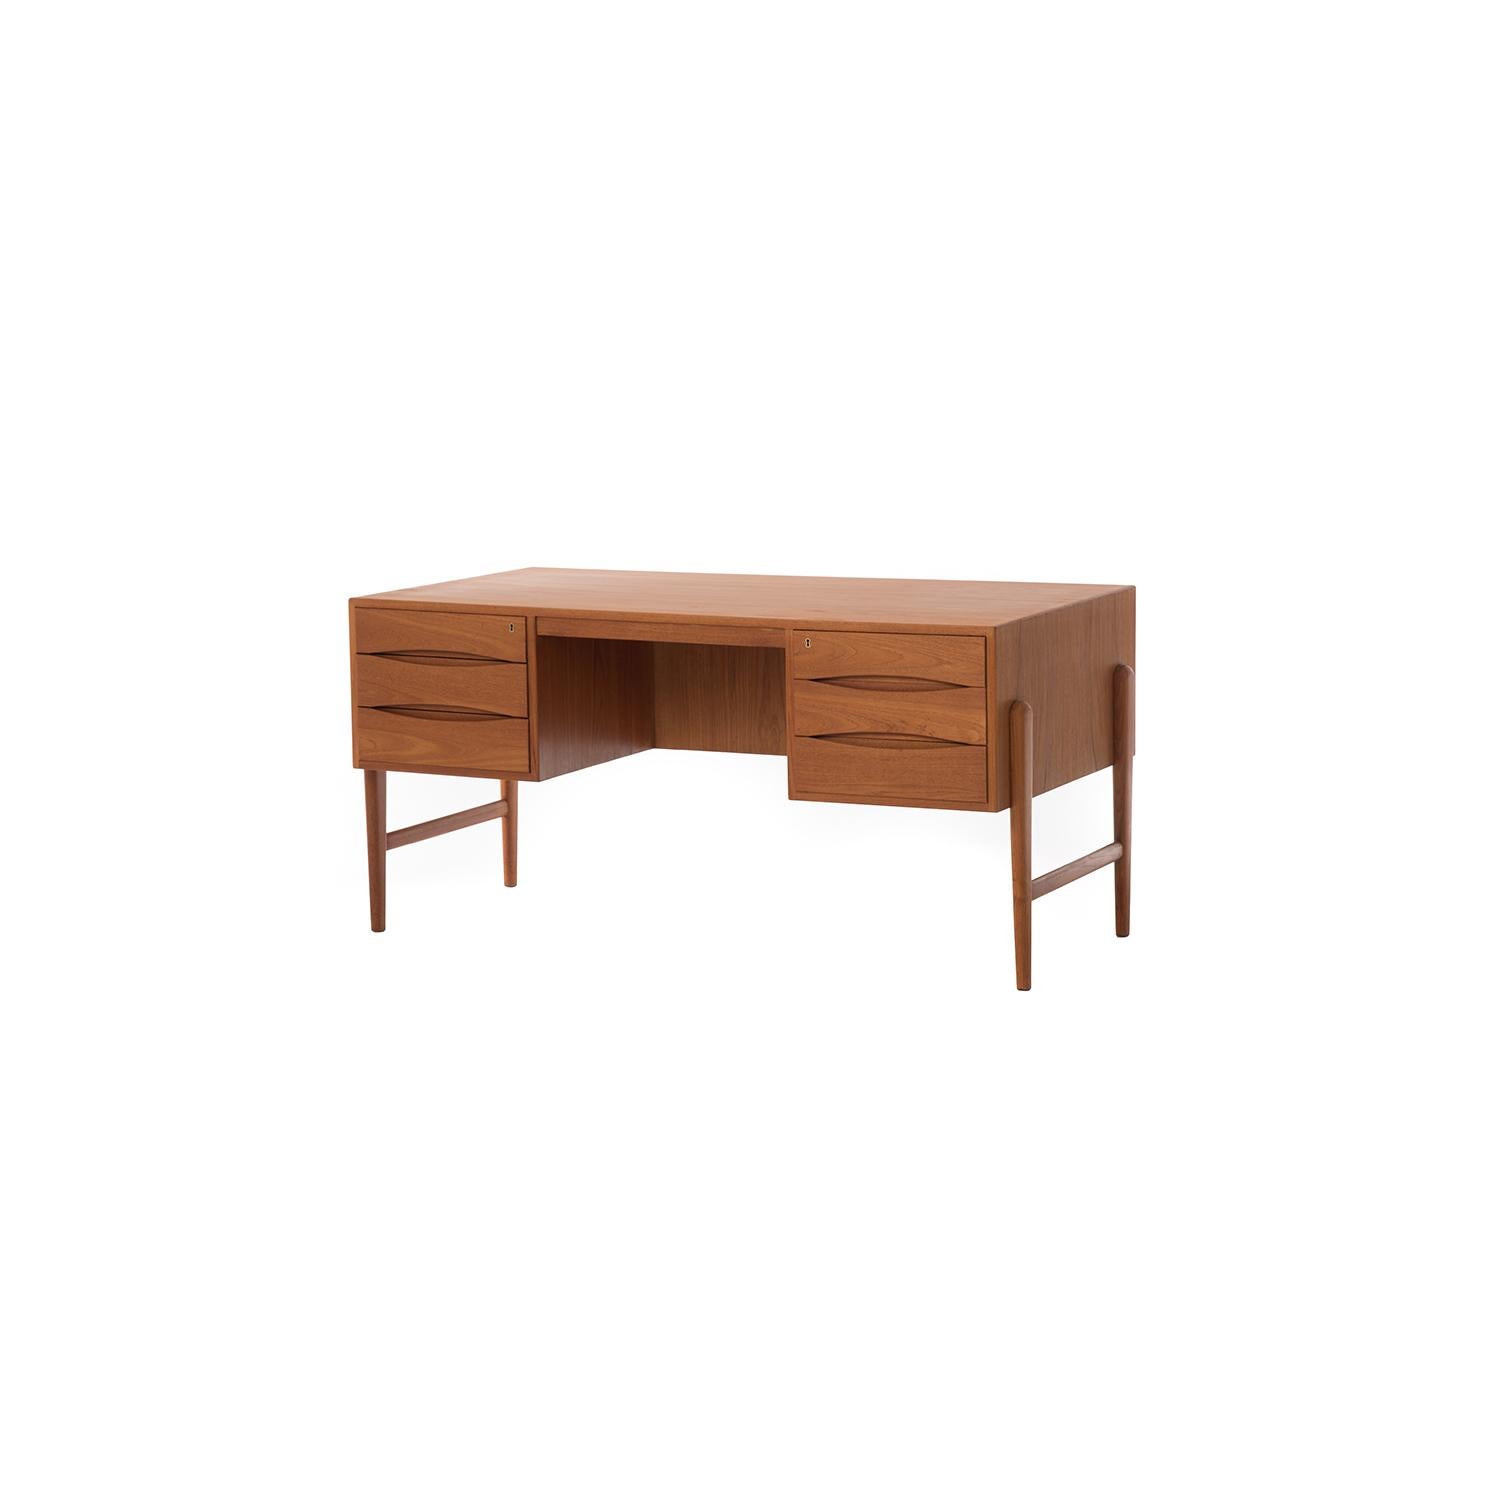 This large teak desk features six drawers (two locking) on the user side, as well as an open shelf/cubby space for additional storage on the backside.